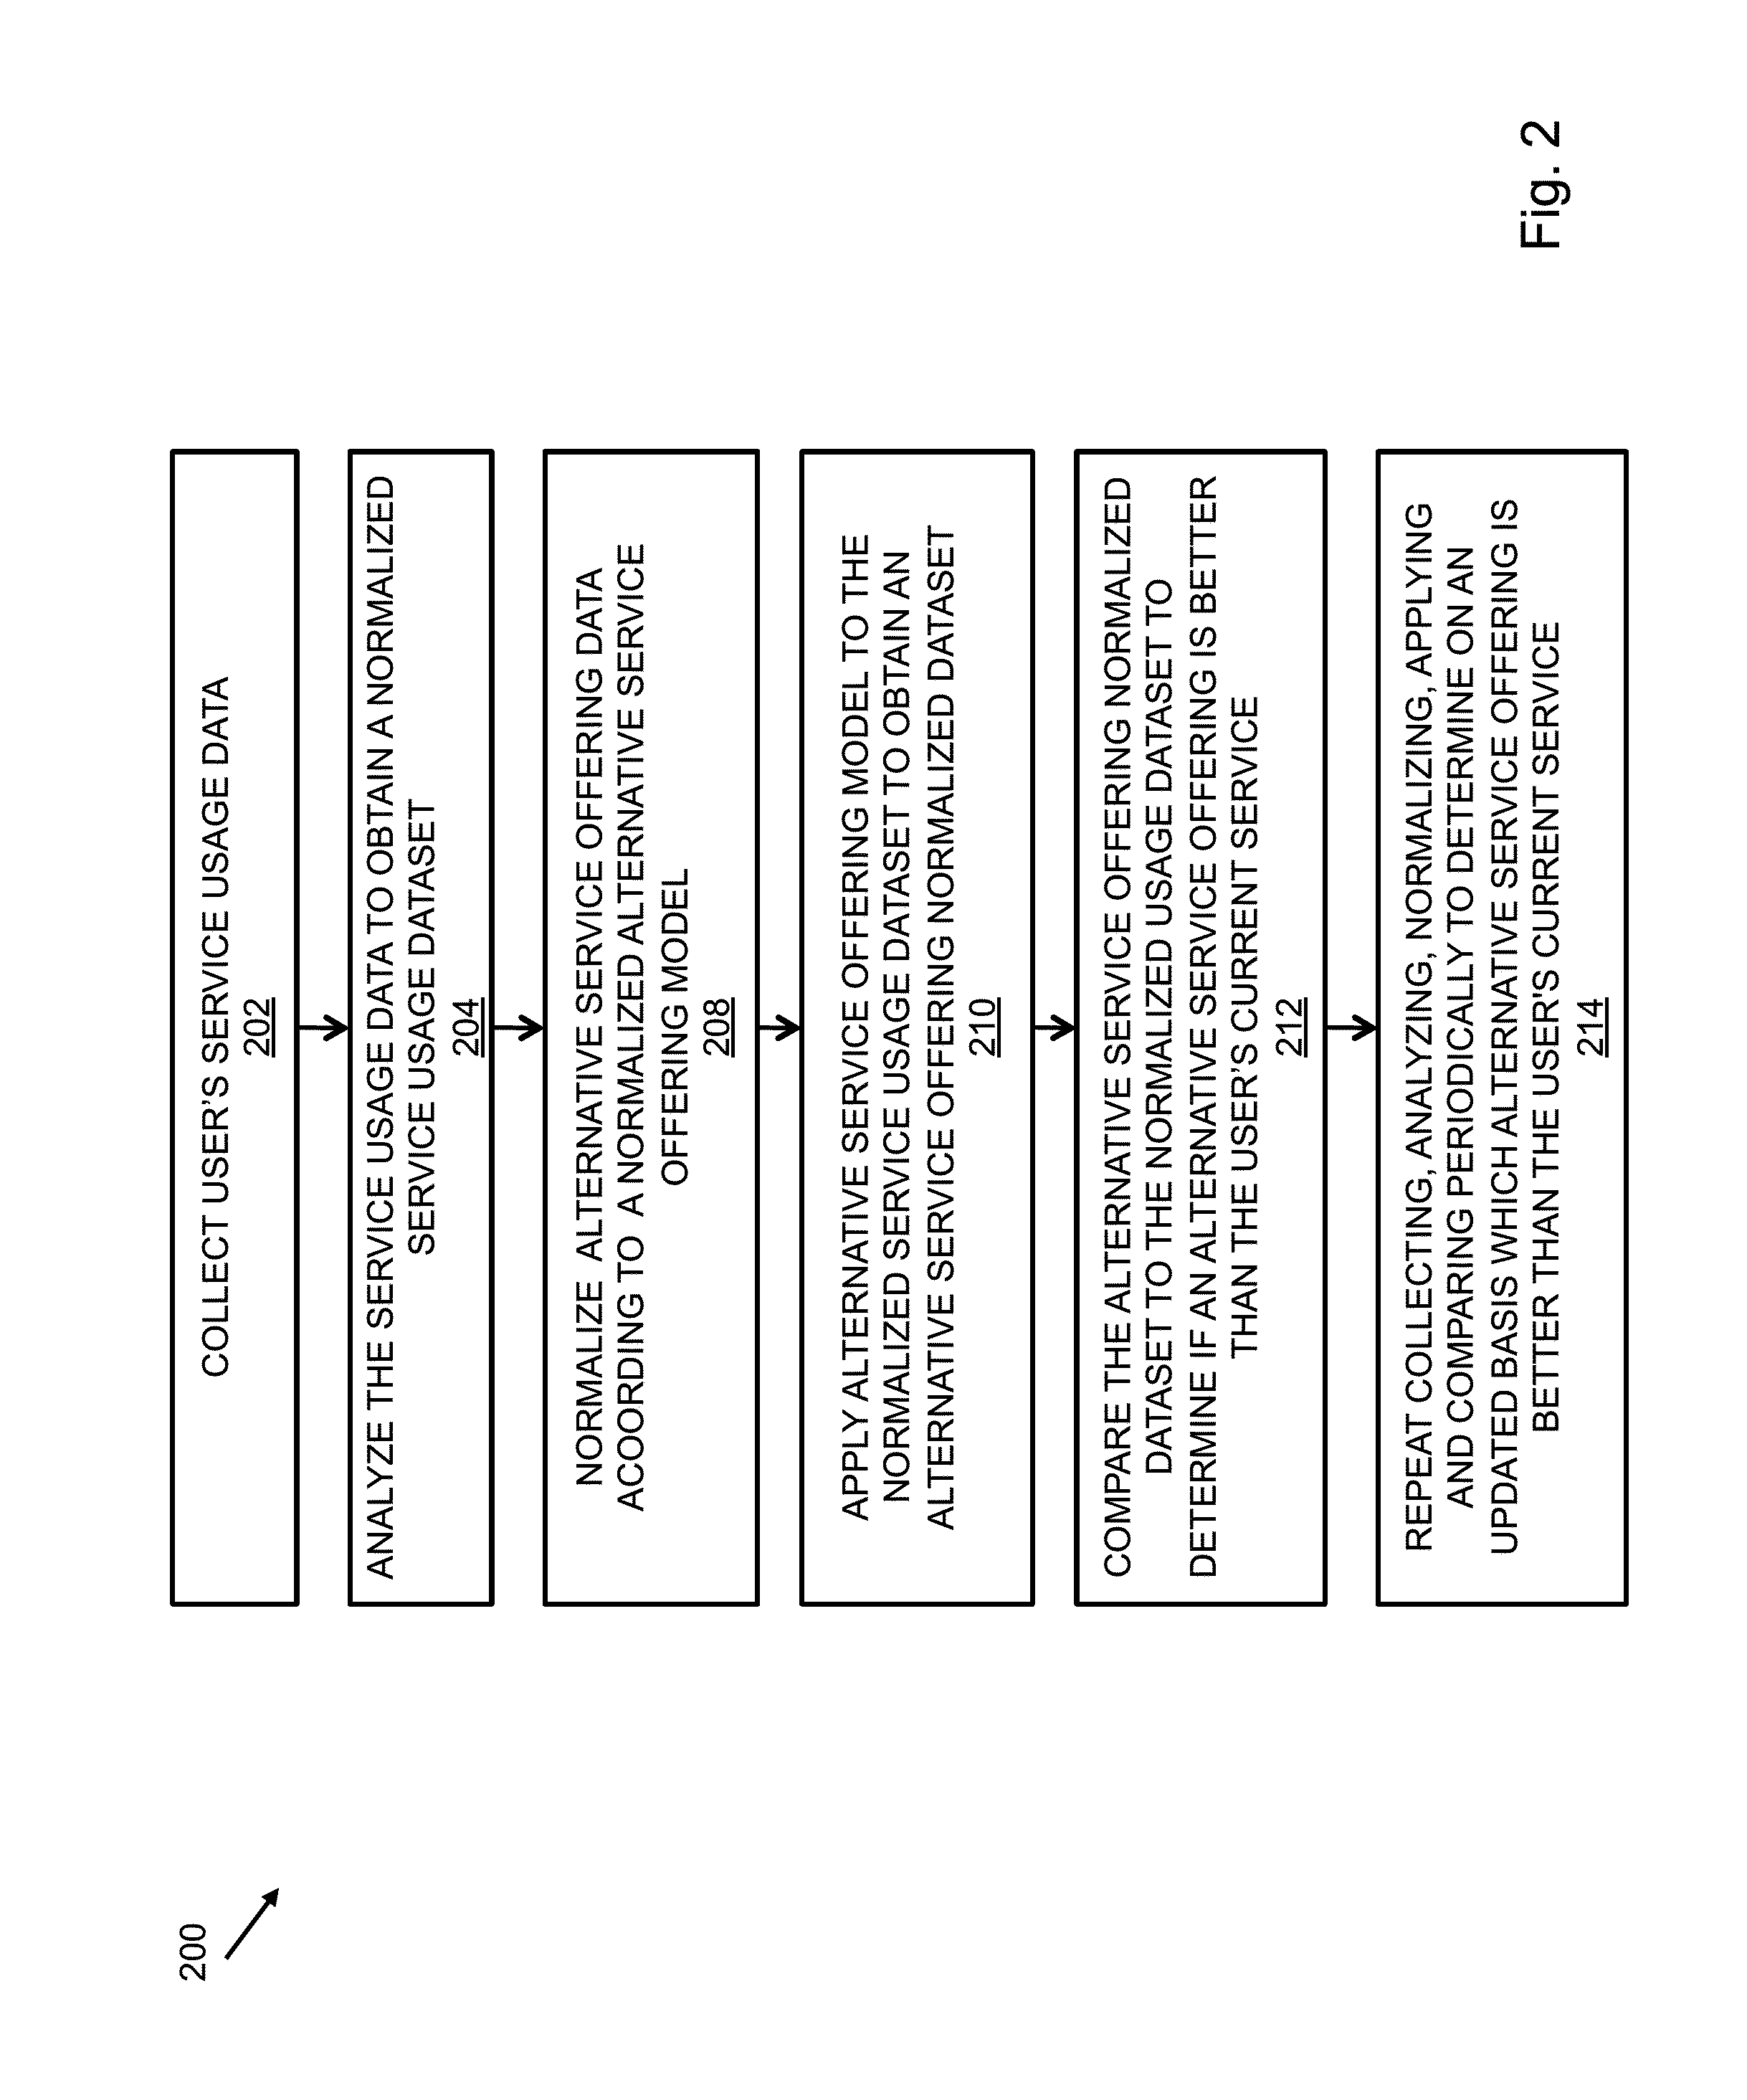 System and method for providing loyalty card rewards through an alternate user financial instrument